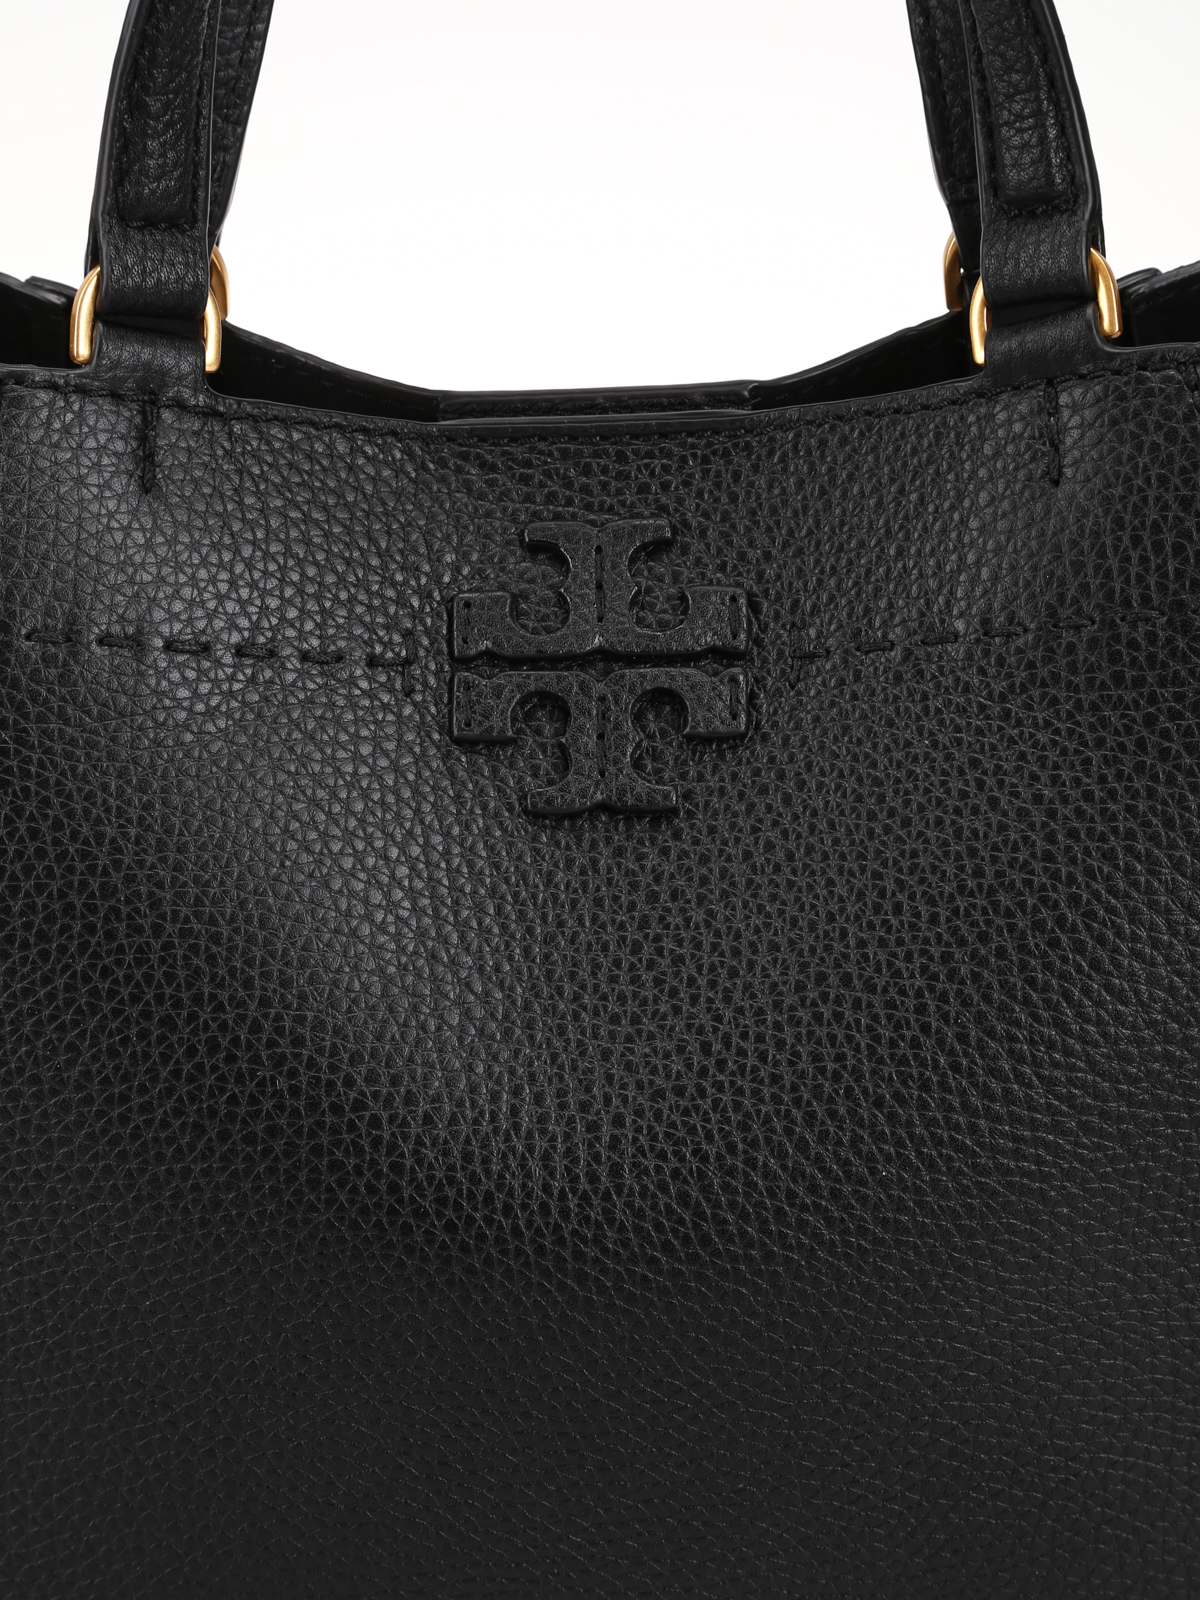 tory burch black leather tote bag